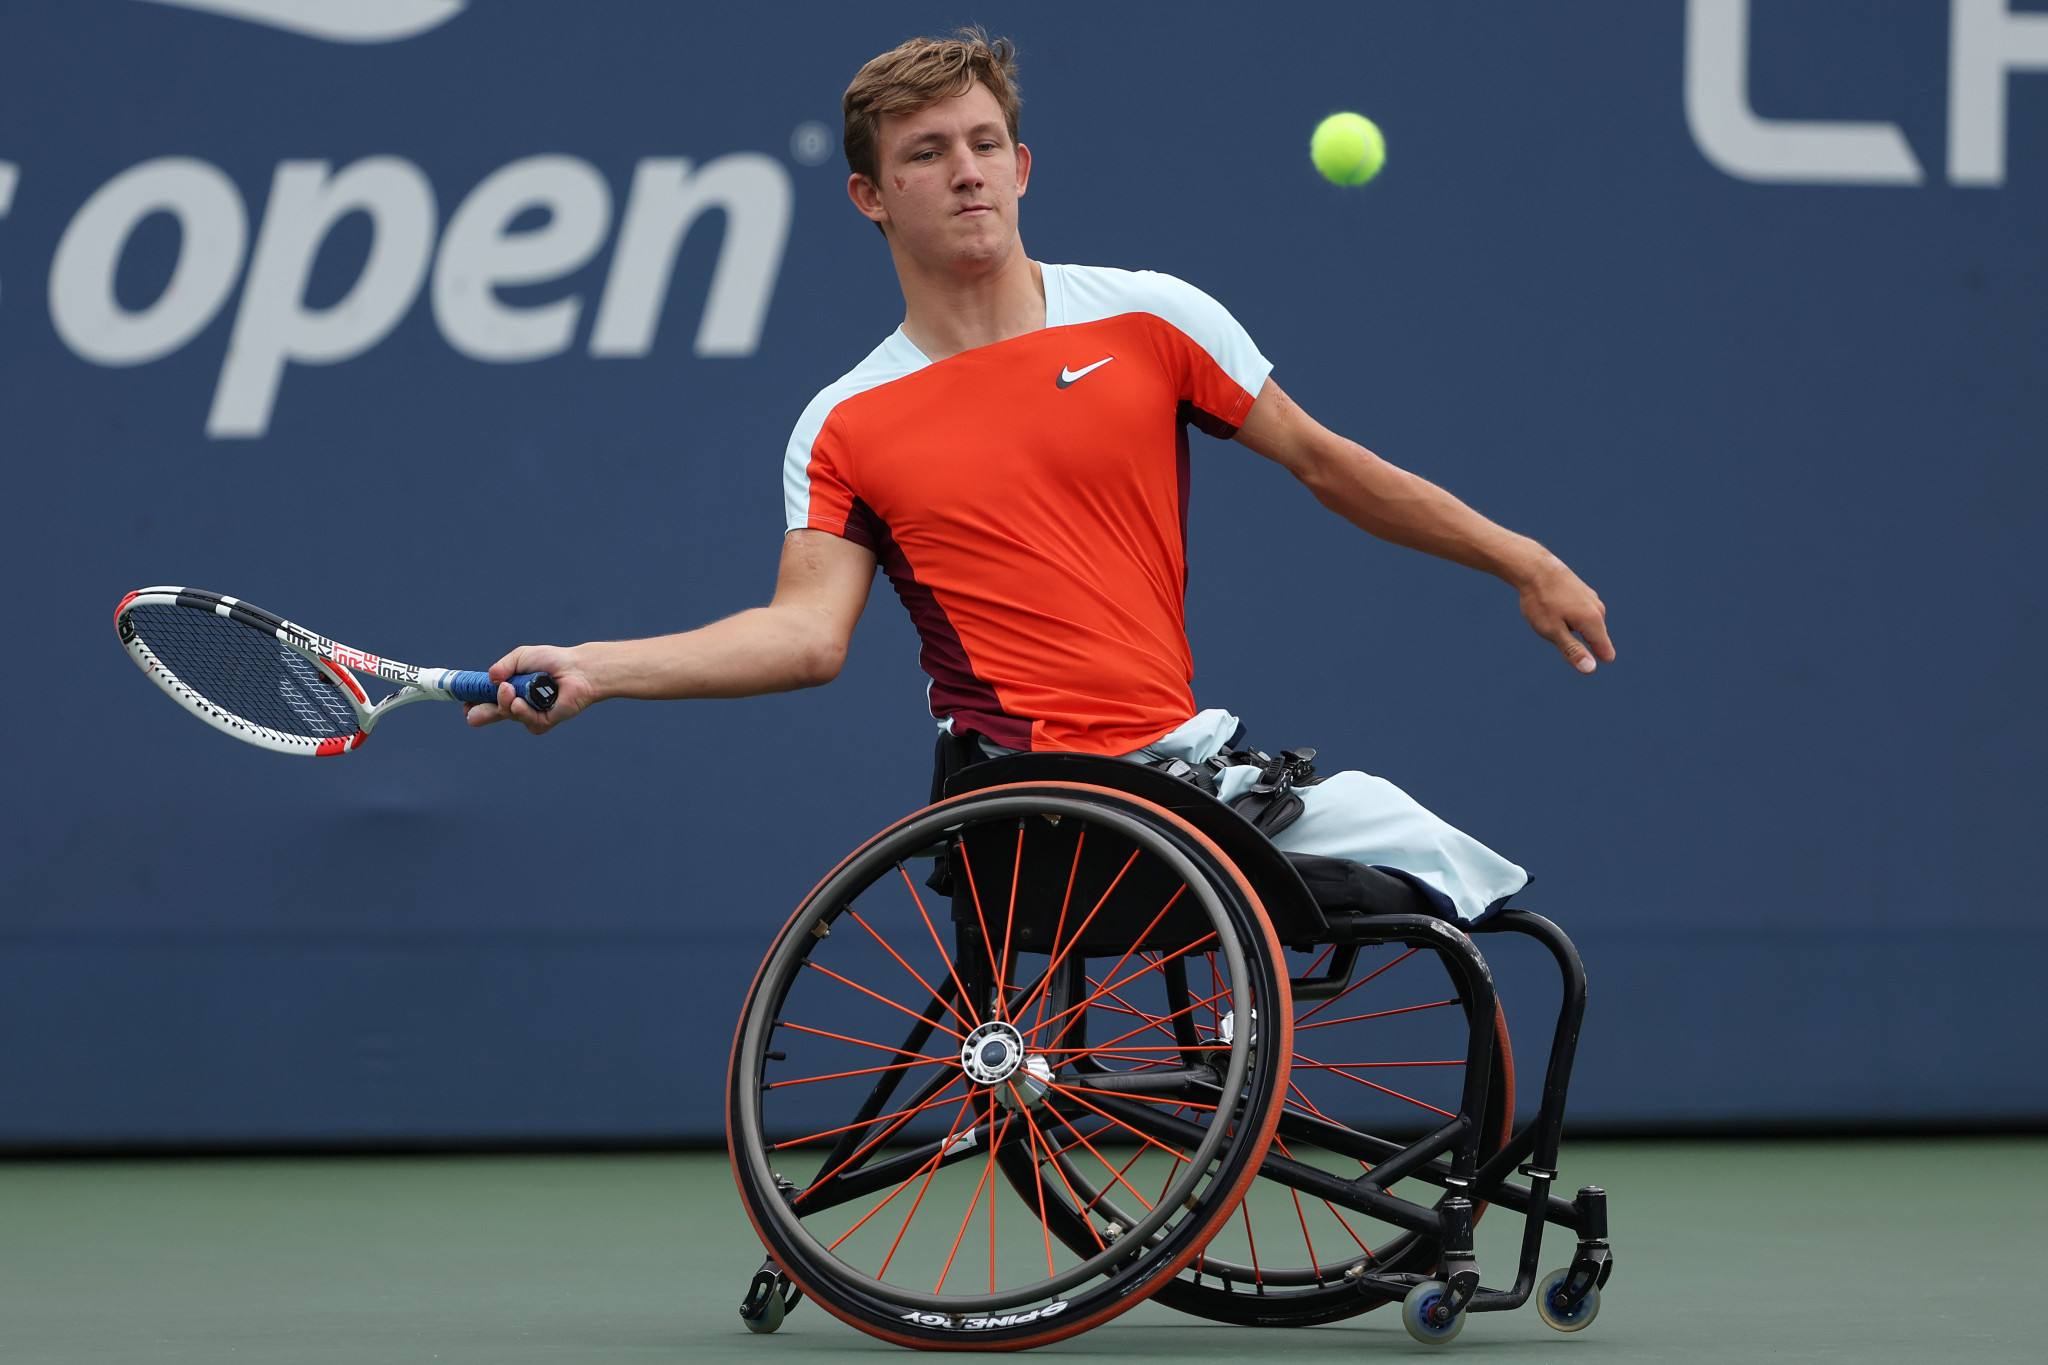 Nils Vink, pictured, was triumphant with his Dutch compatriot Sam Schröder in the quad doubles decider
©Getty Images